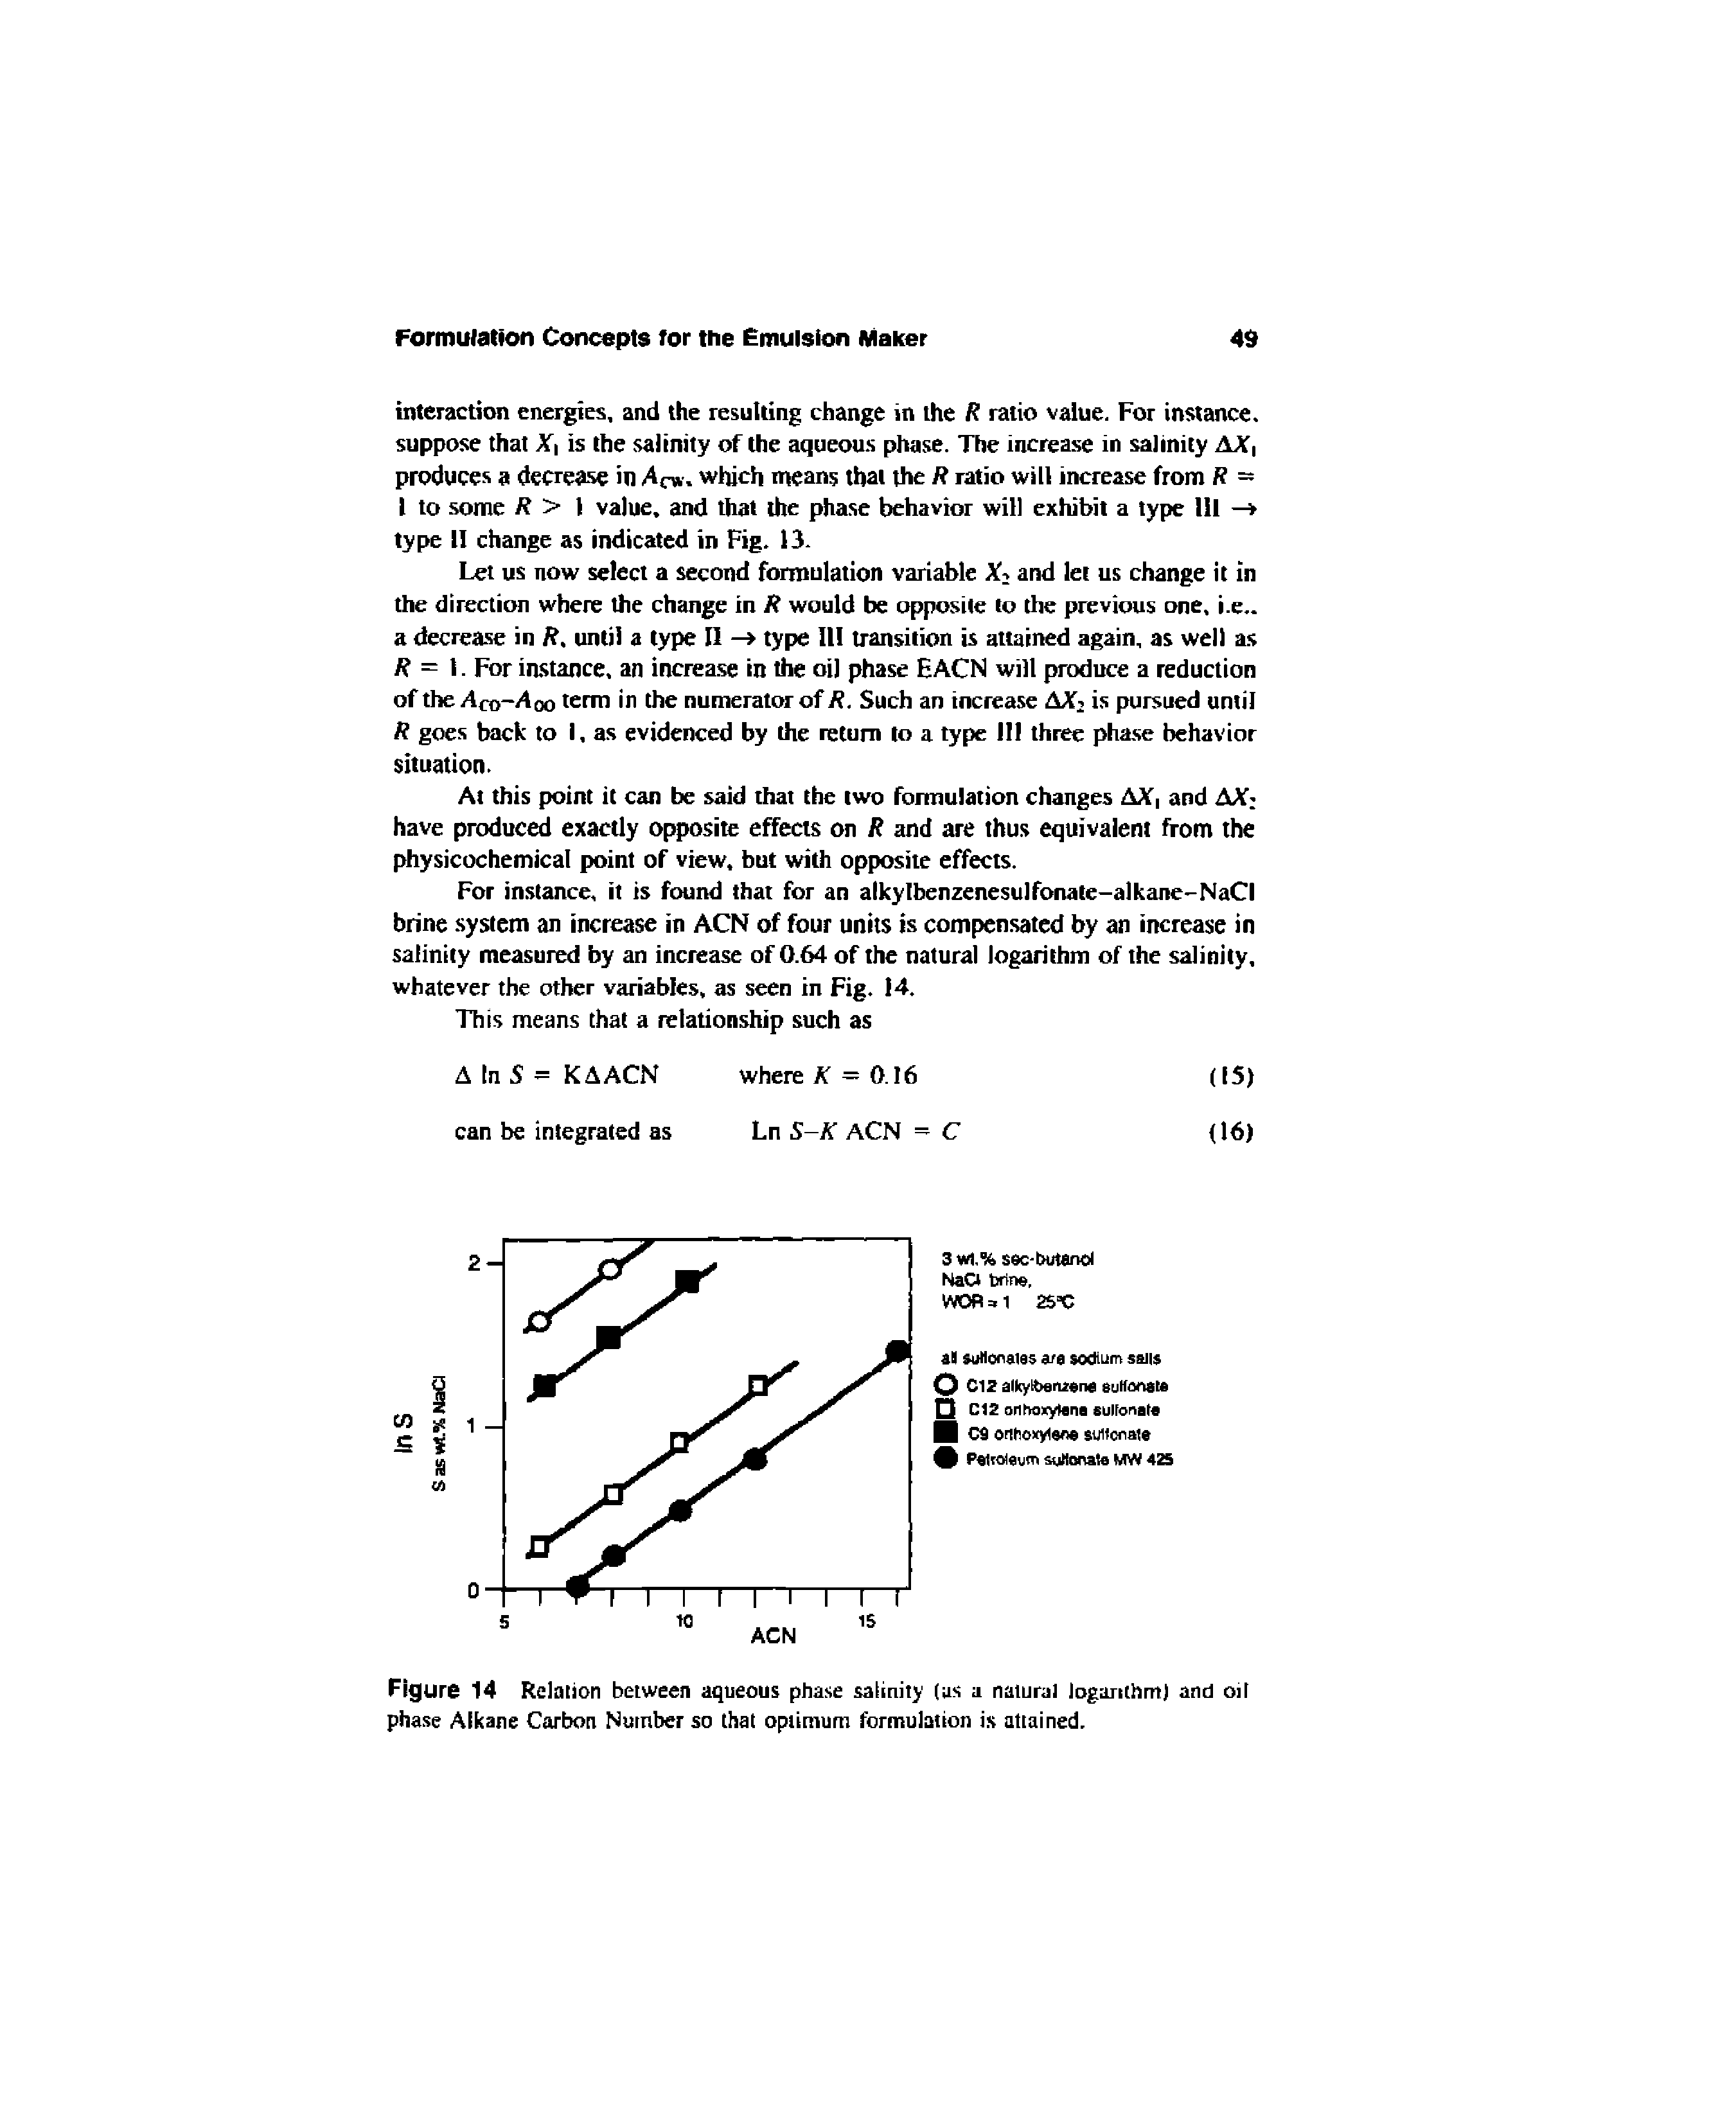 Figure 14 Relation between aqueous phase salinity (as a natural logarithm) and oil phase Alkane Carbon Number so that optimum formulation is attained.